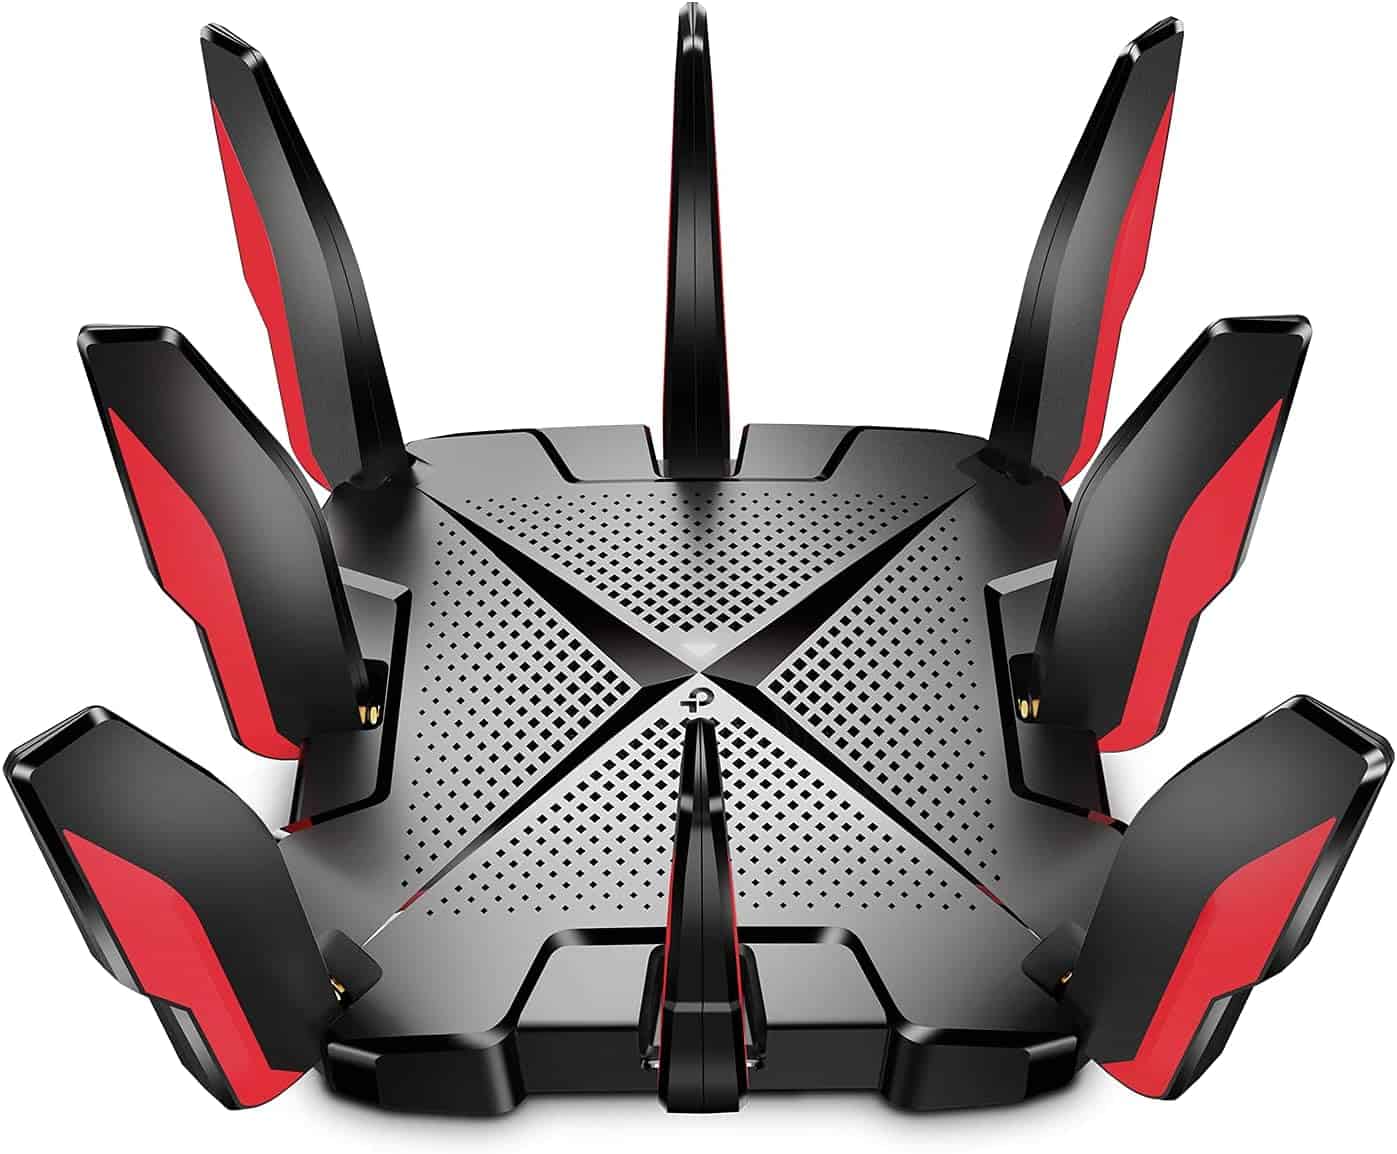 High-performance gaming router with eight external antennas and a black and red design, isolated on a white background.